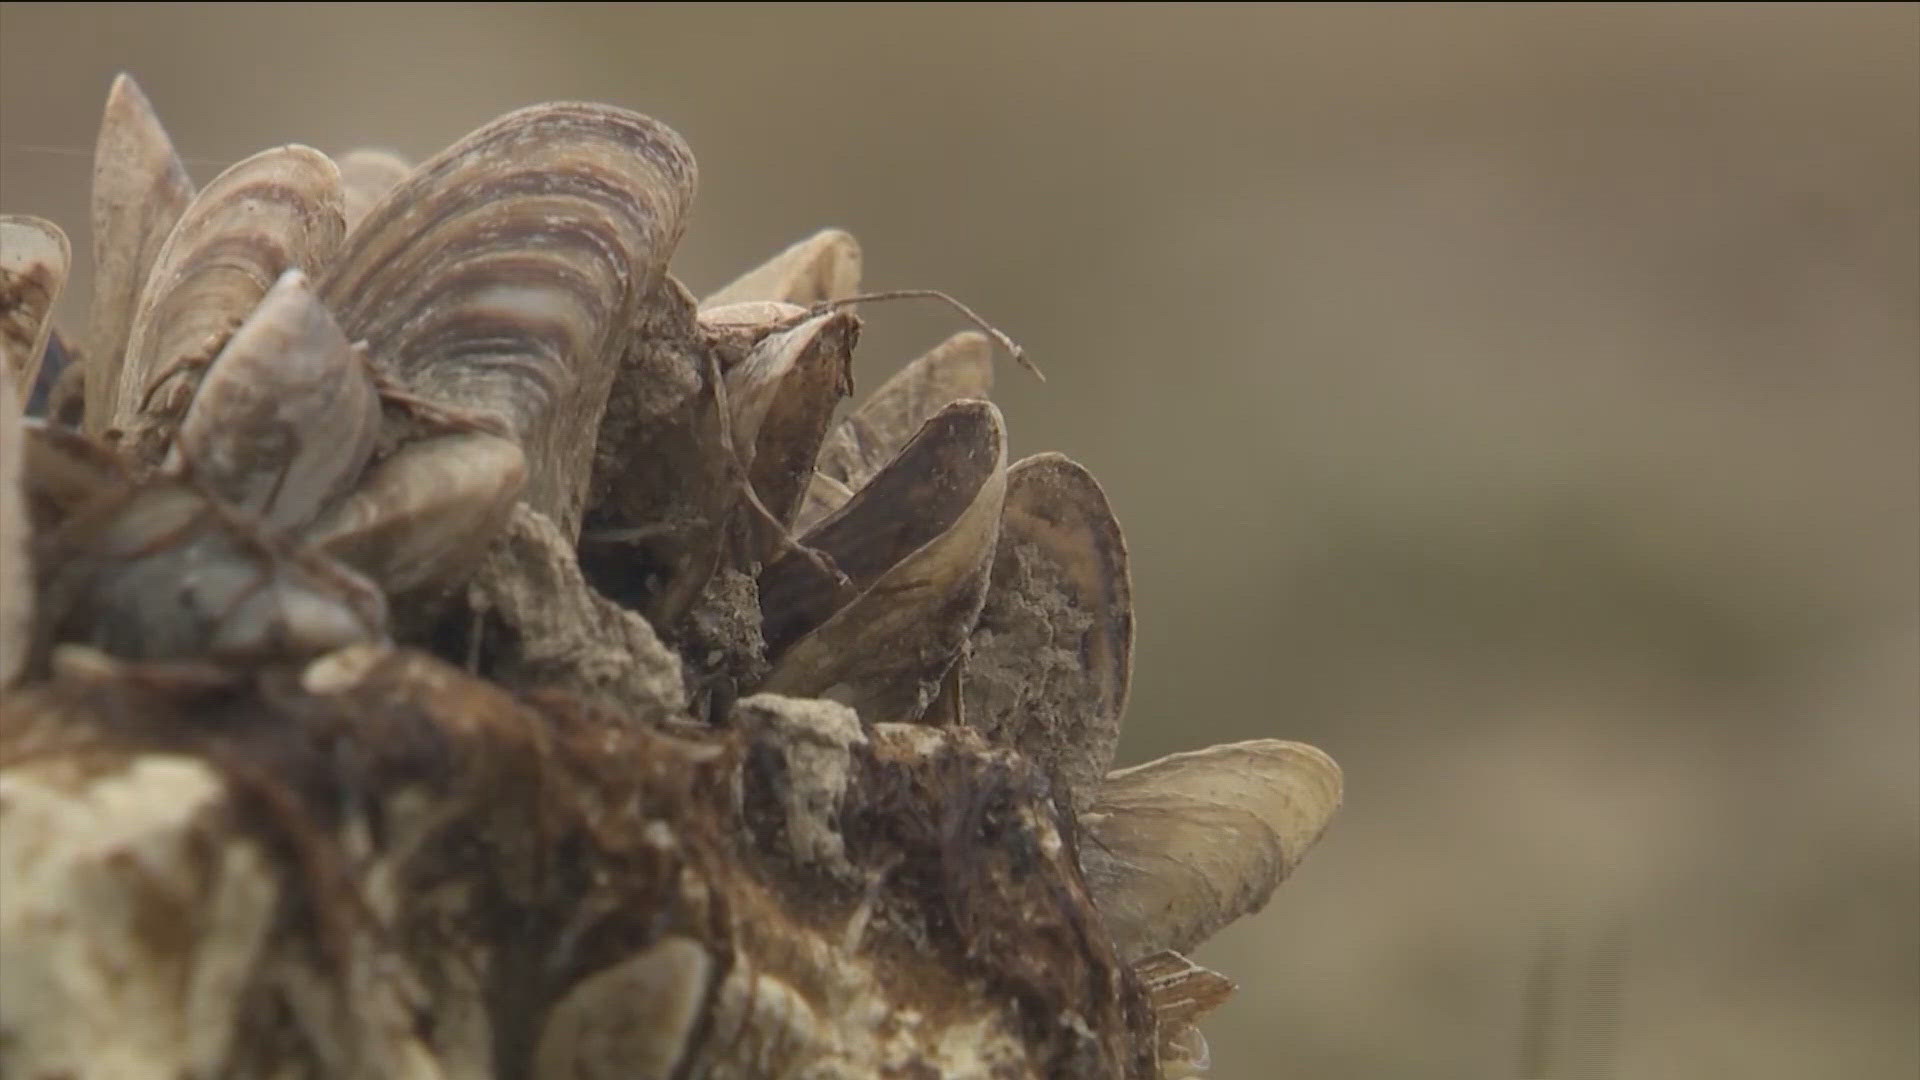 Texas Parks and Wildlife officials are reminding boaters to do their part to keep invasive species like zebra mussels and hydrilla from spreading.